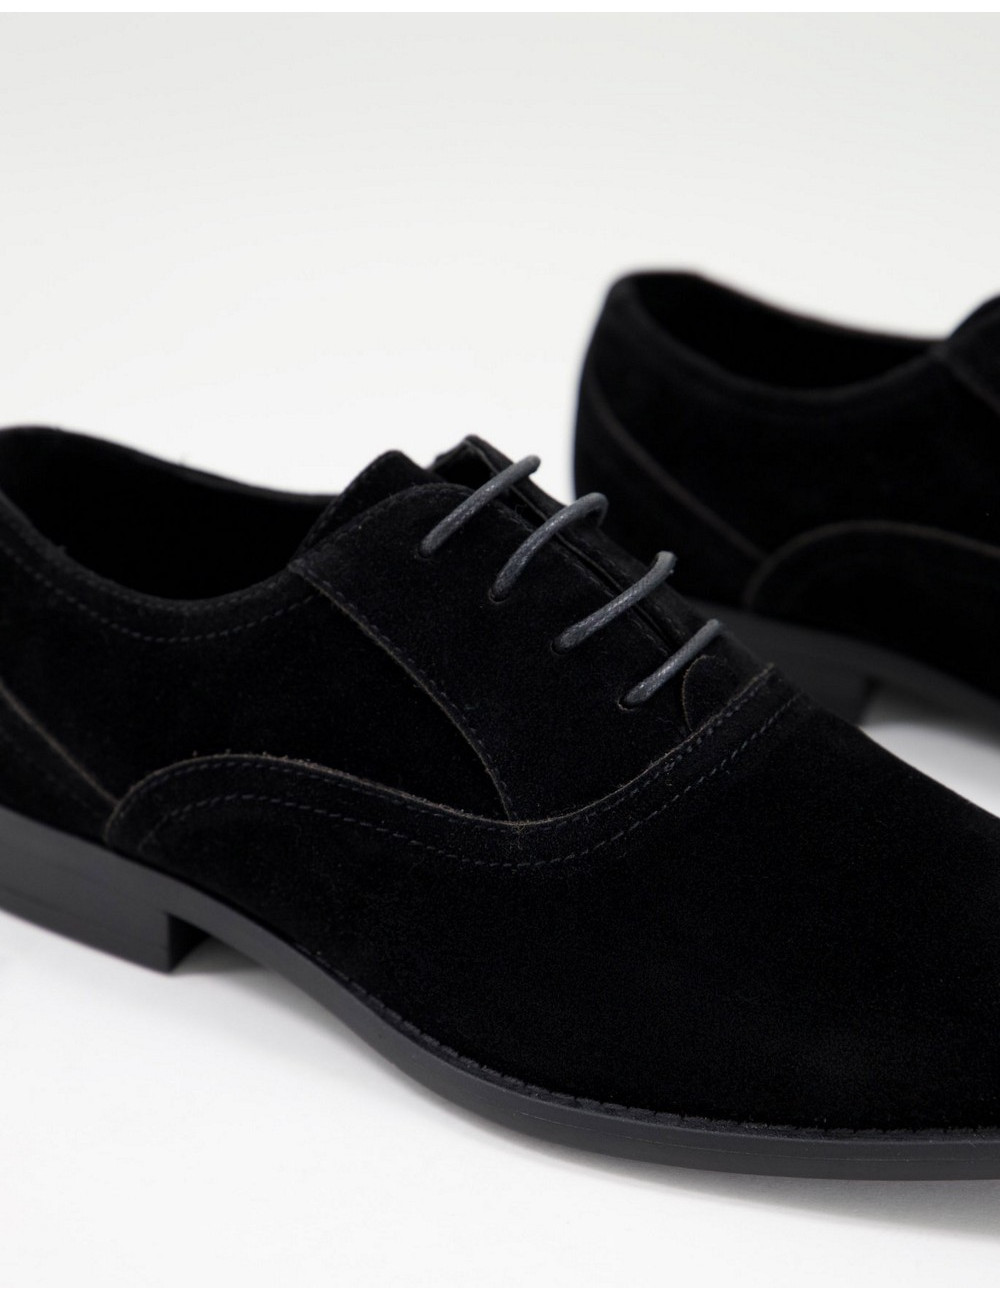 ASOS DESIGN oxford shoes in...